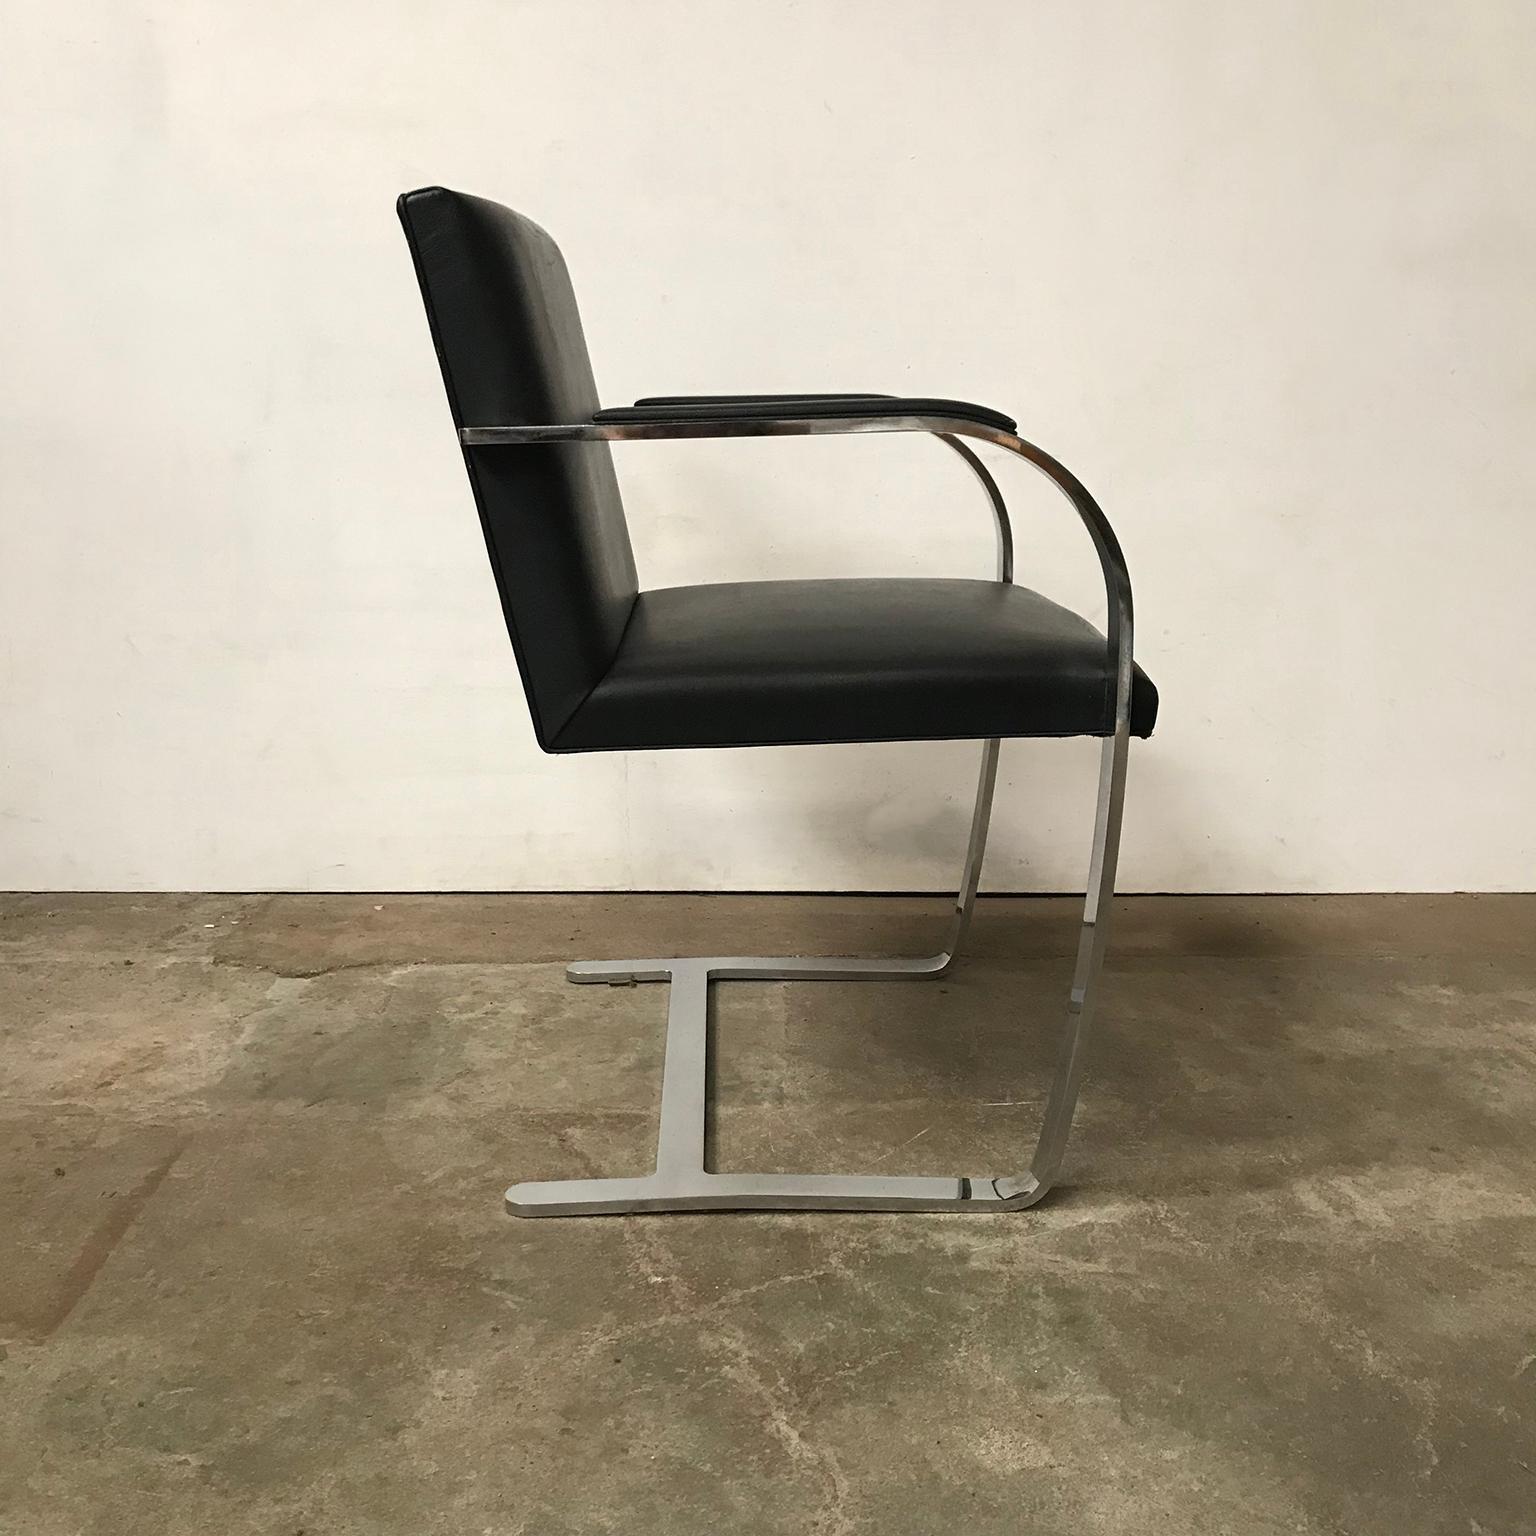 Brno in black. Beautiful chair with strong but elegant design and fits in every interior. The chair shows some minor traces of wear like wear on the corners on top of the back (picture #13) and on the armrests (#10 and #11). The base is in good